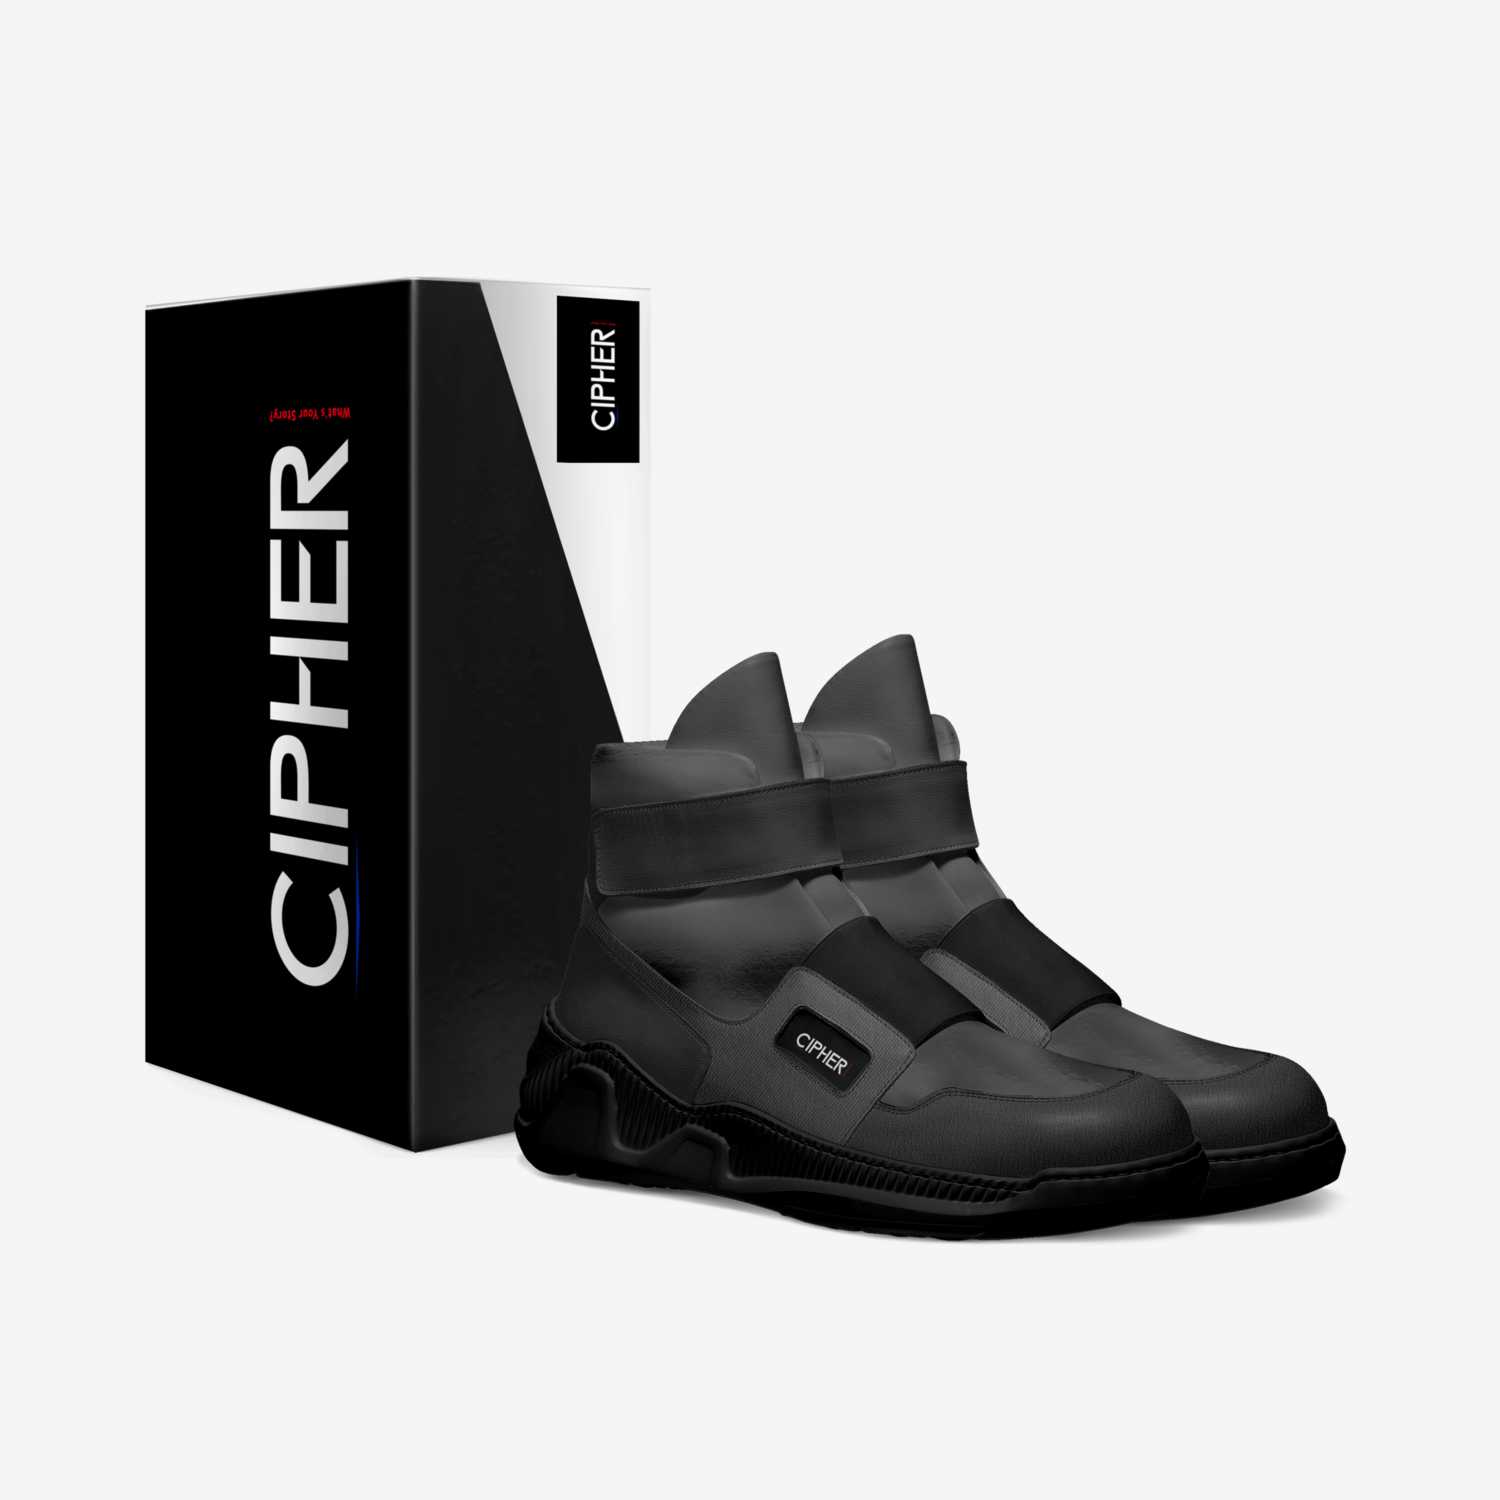 CIPHER: CODE ZERO custom made in Italy shoes by Charles Harewood Jr | Box view